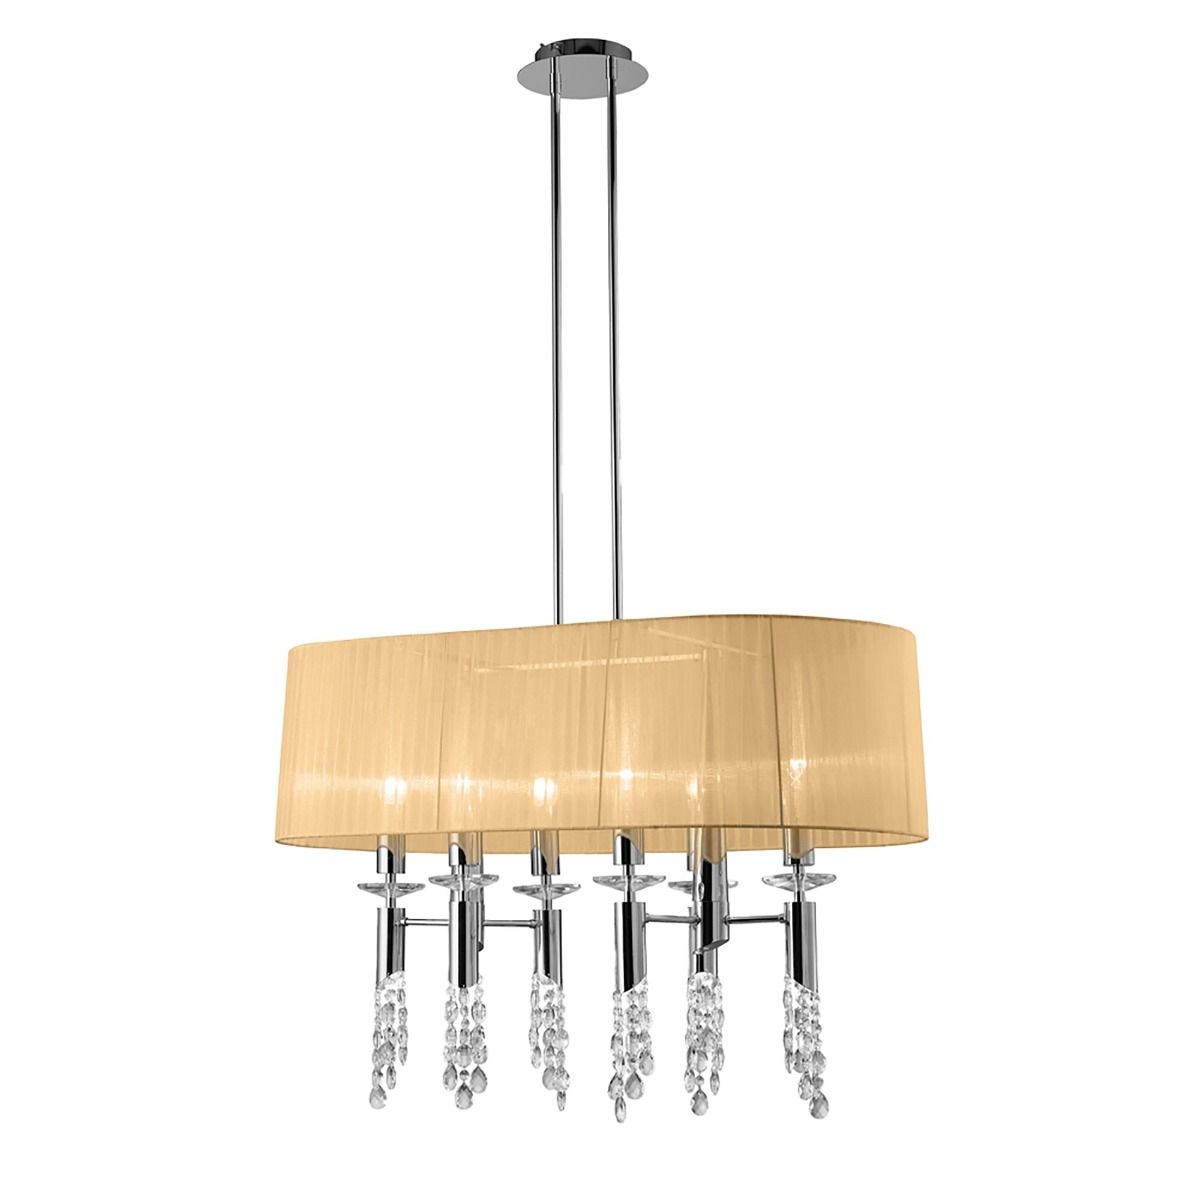 M3853 Mantra Tiffany Pendant Fitting 12 Light Oval Polished Chrome Soft Bronze Shade Clear Crystal